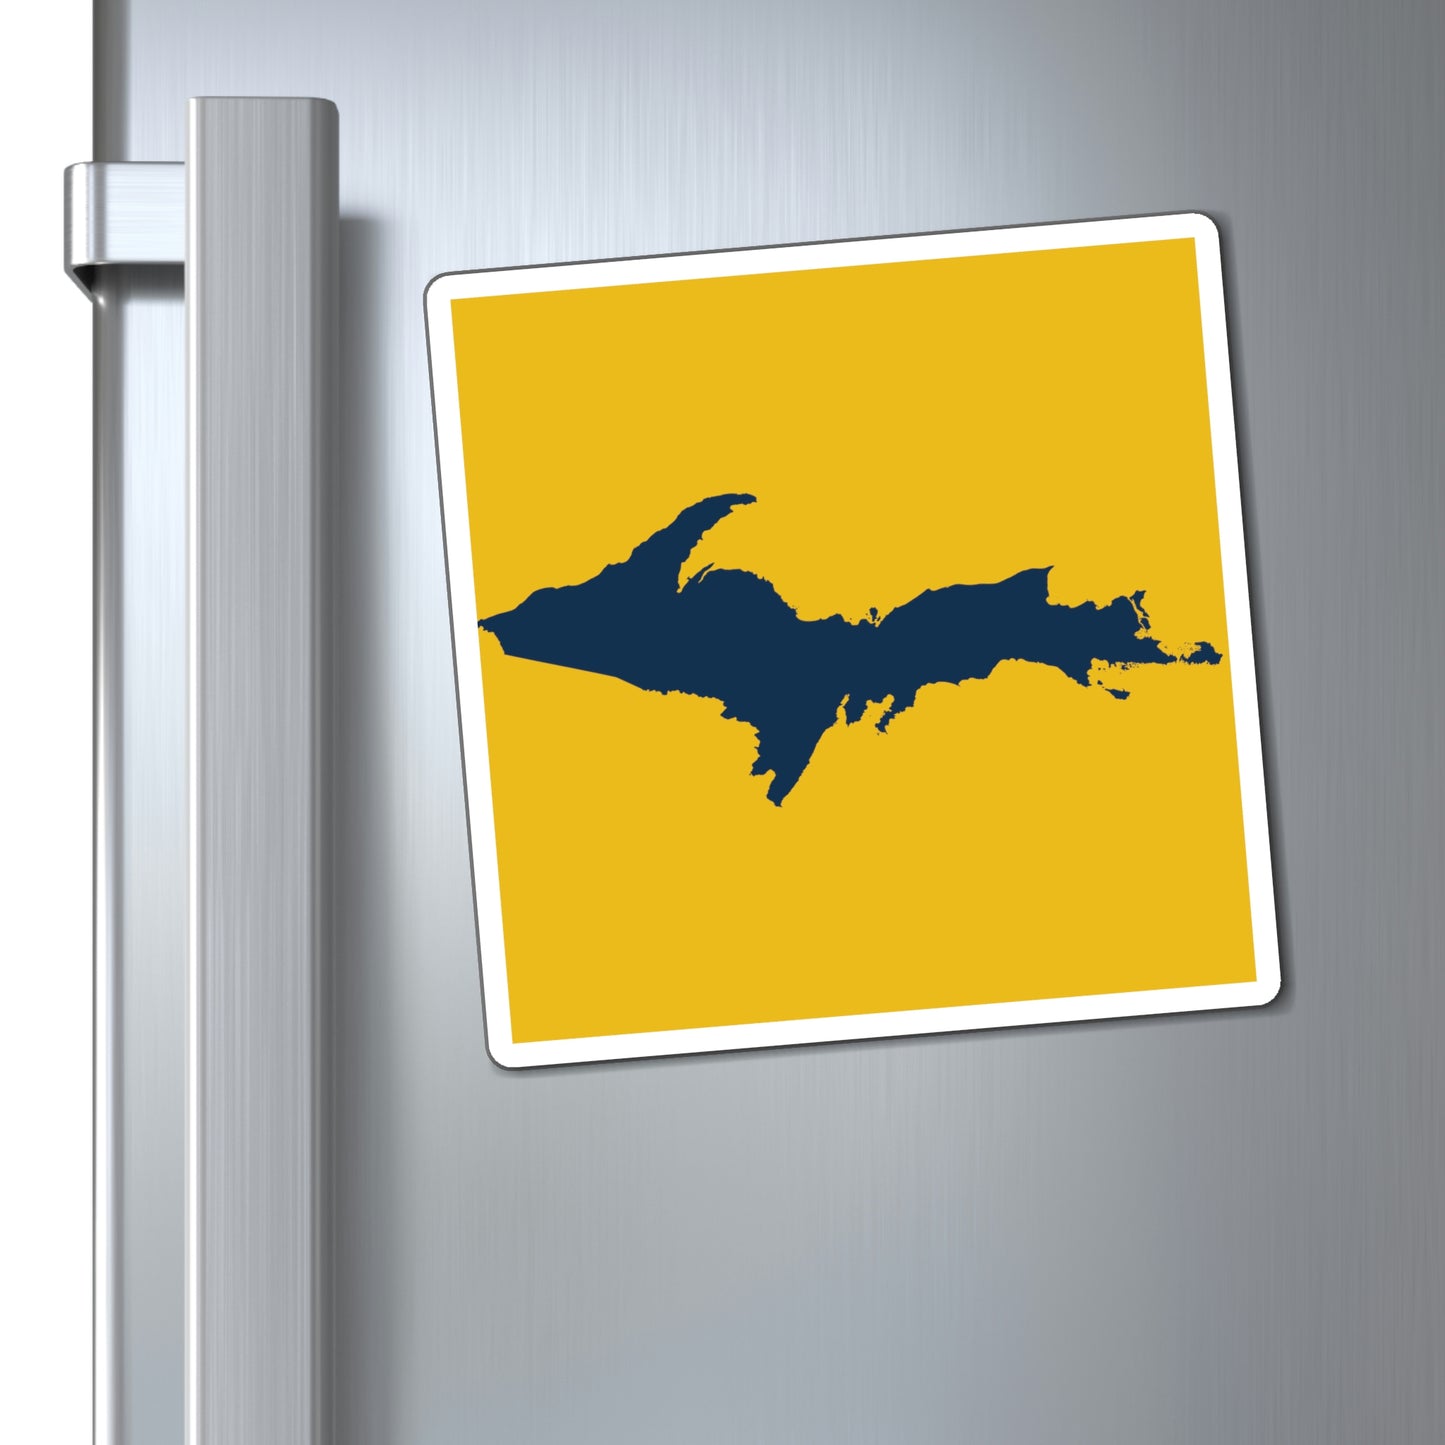 Michigan Upper Peninsula Square Magnet (Gold w/ Navy UP Outline)